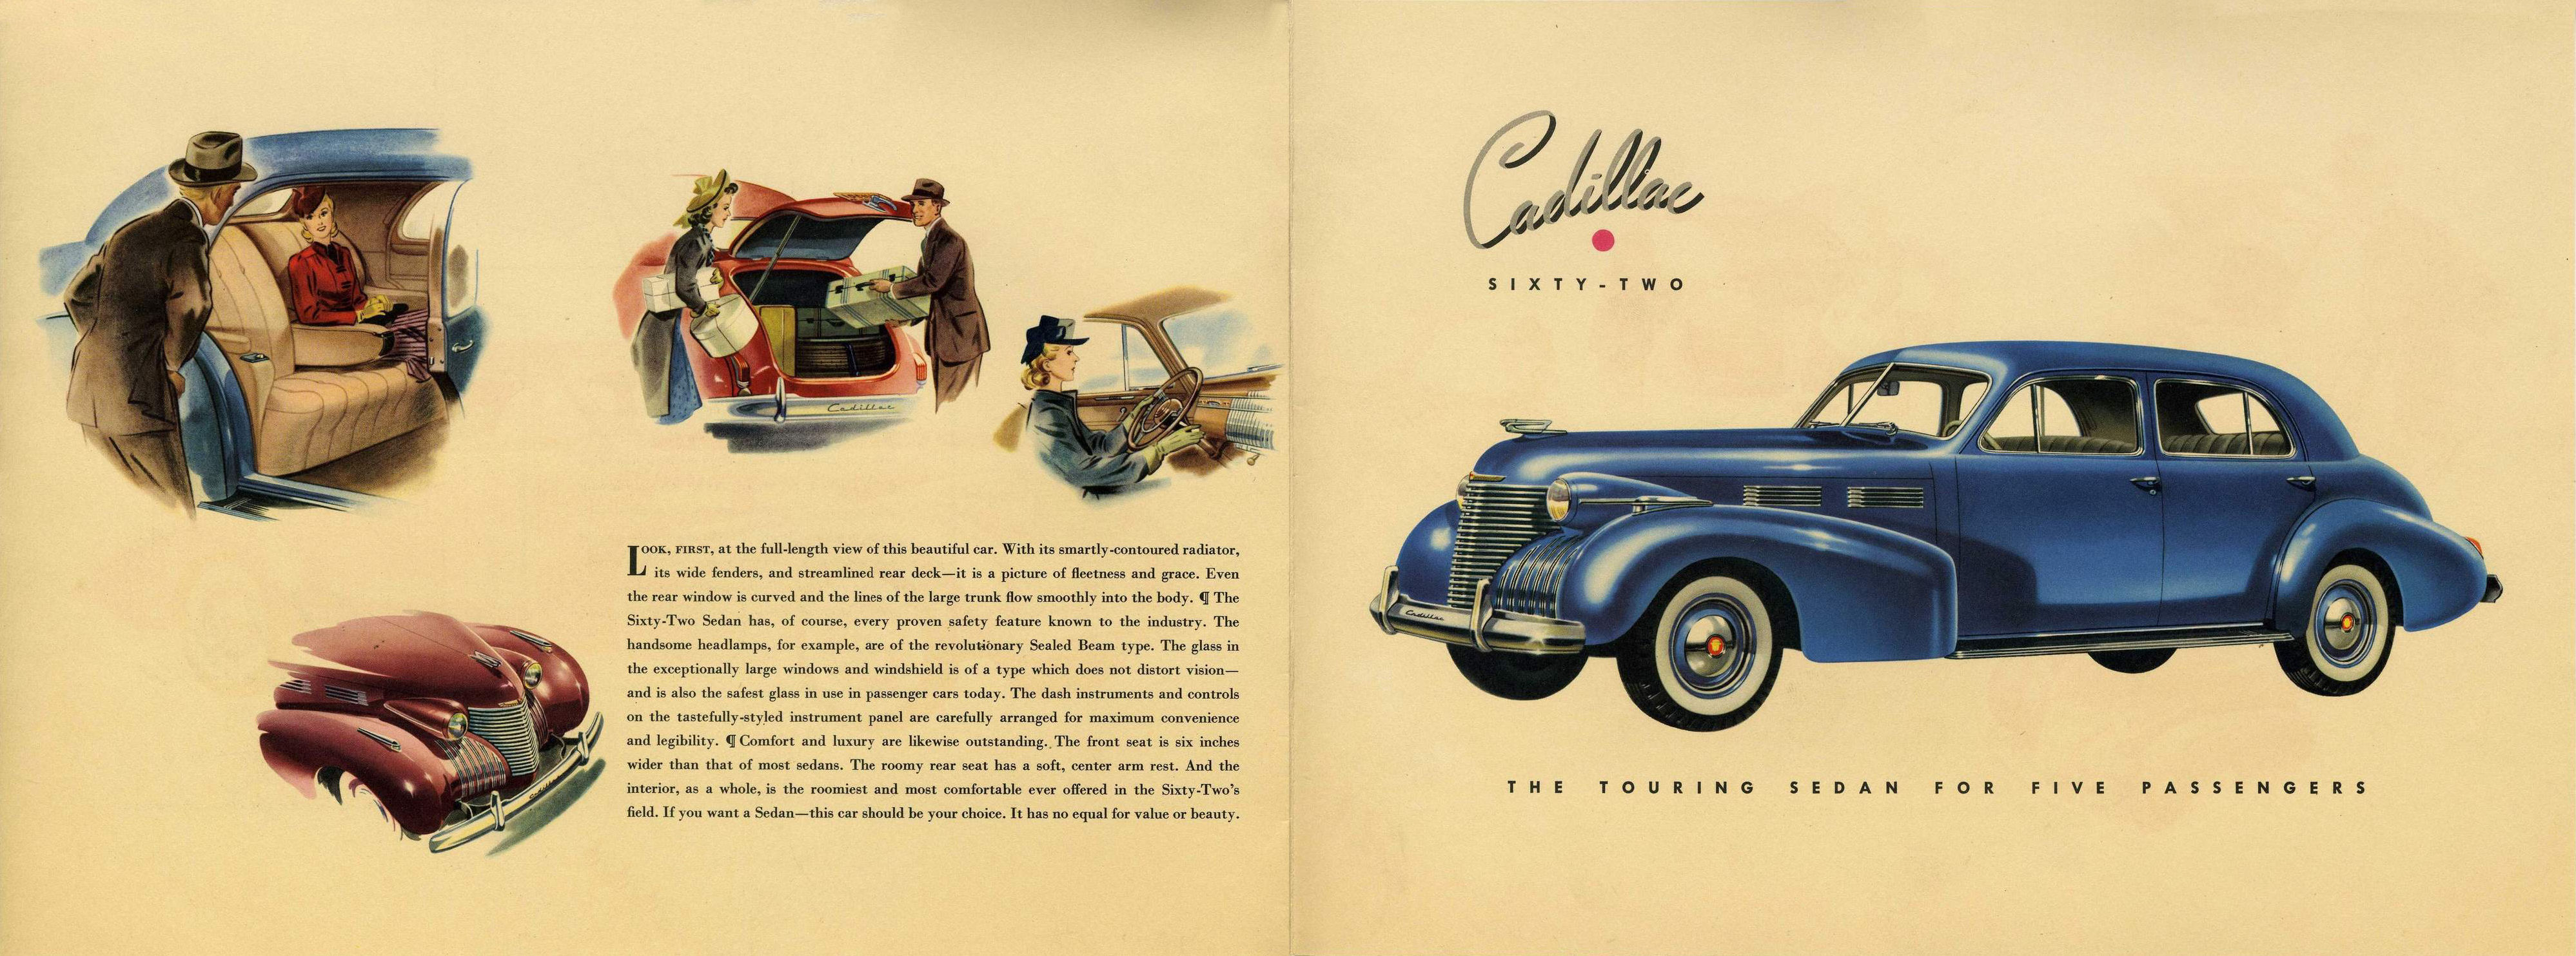 1940 Cadillac Mailer Page 5